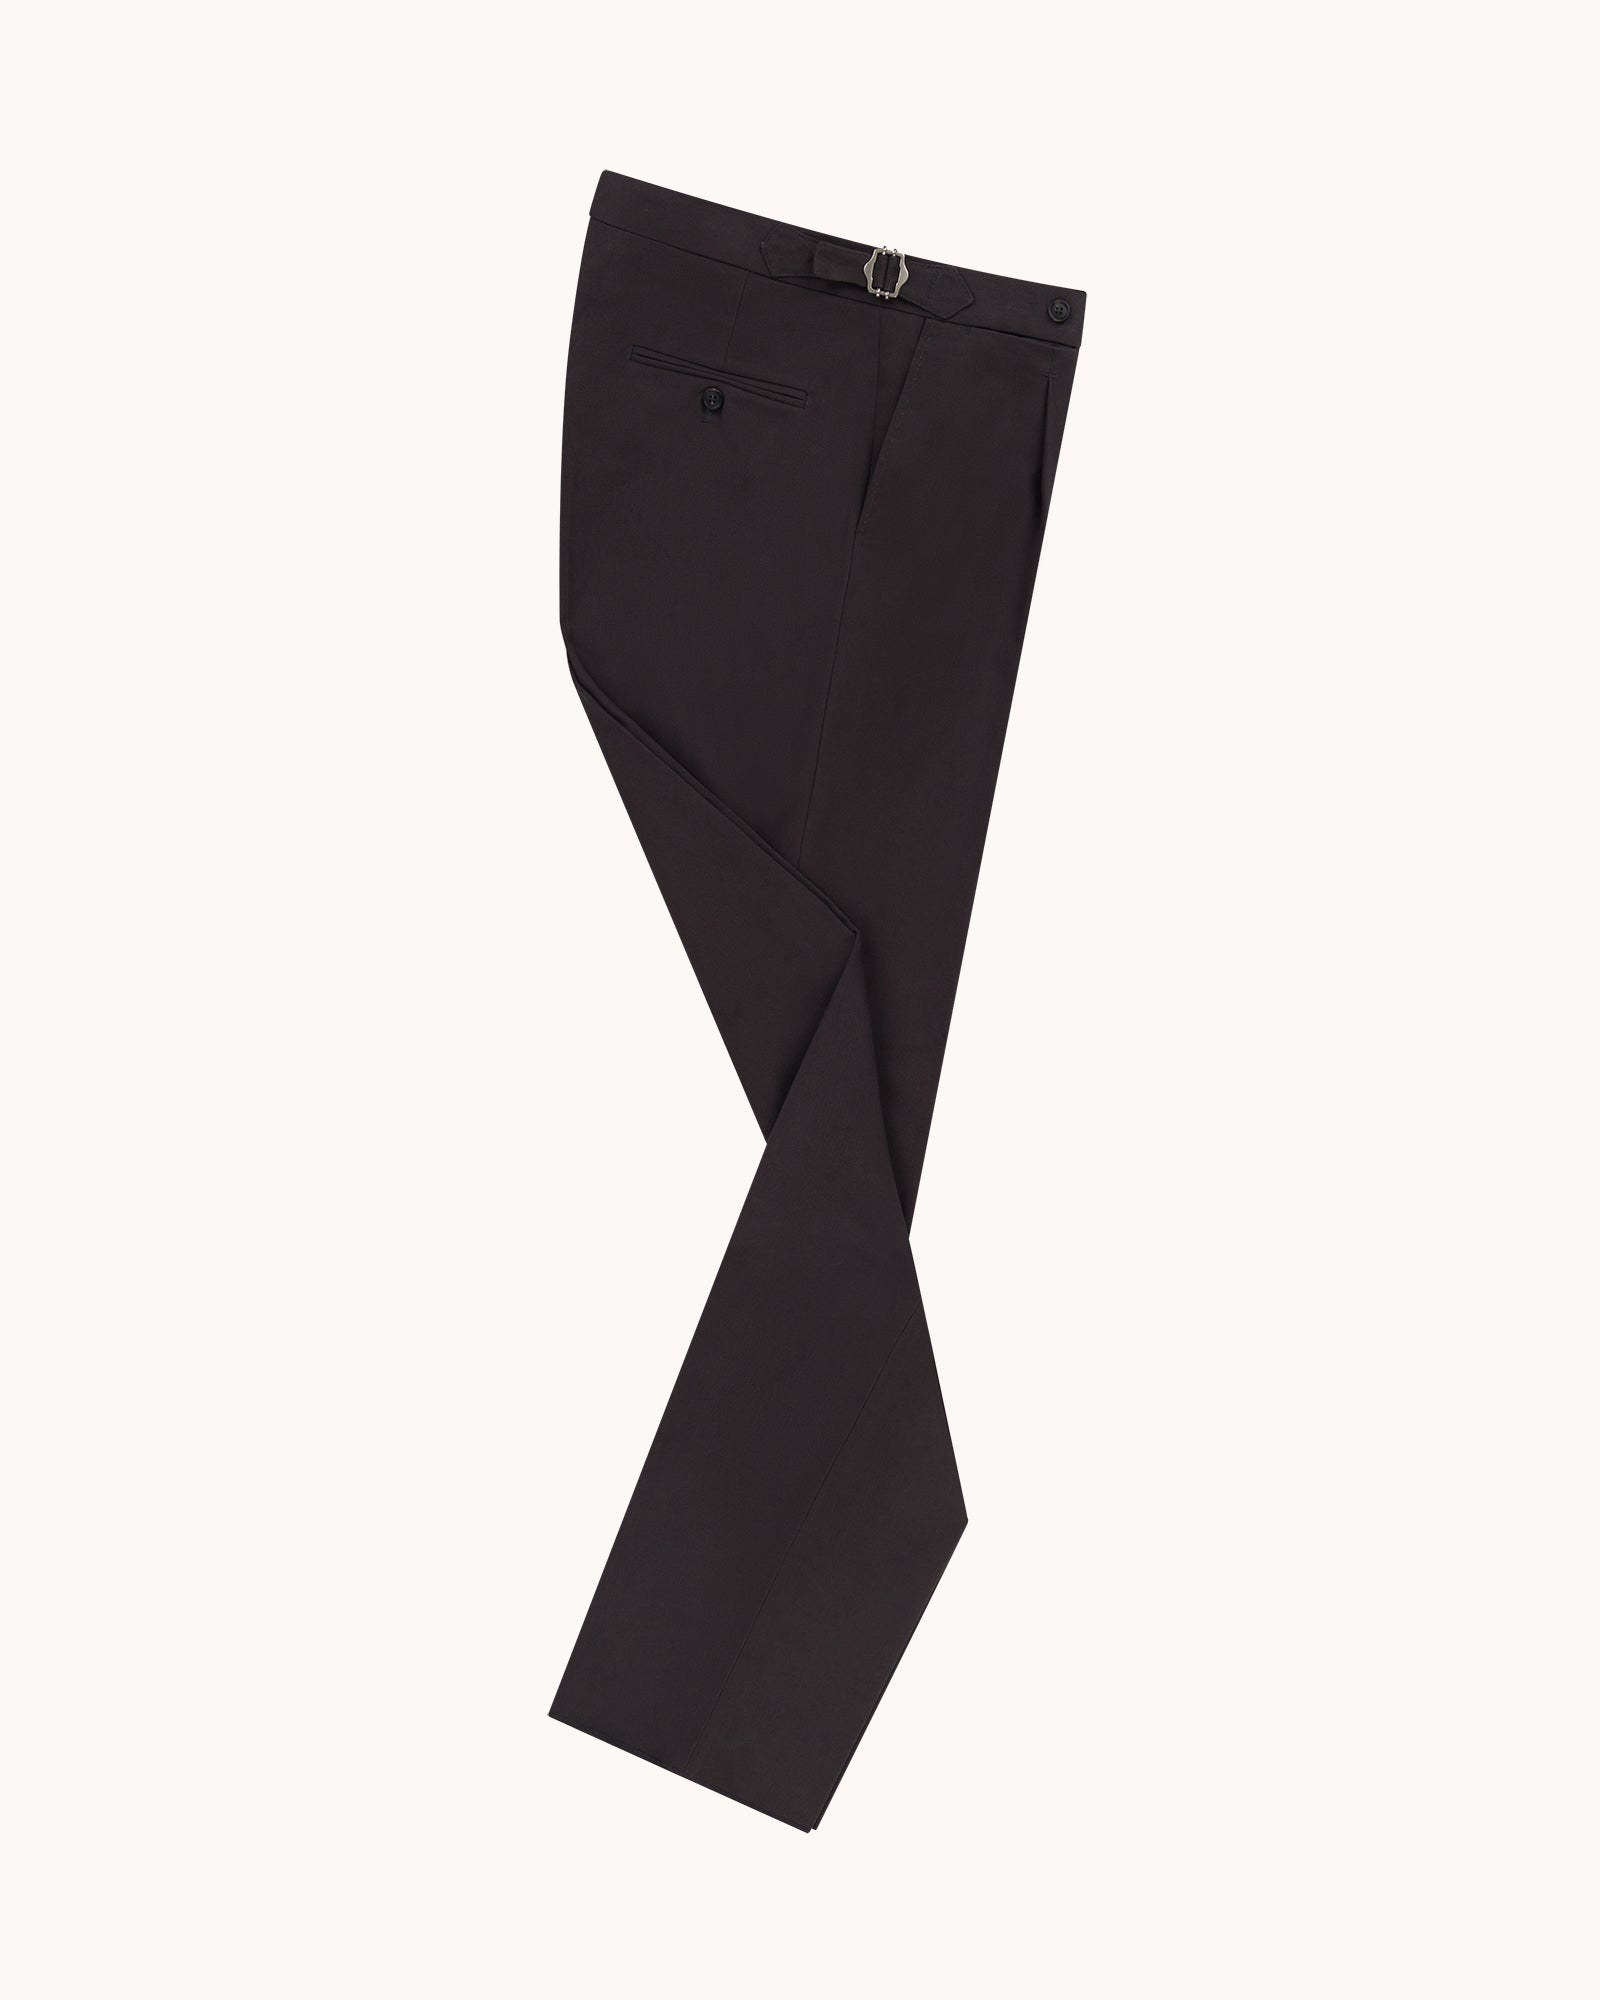 Single Pleat Trouser - Anthracite Brushed Cotton